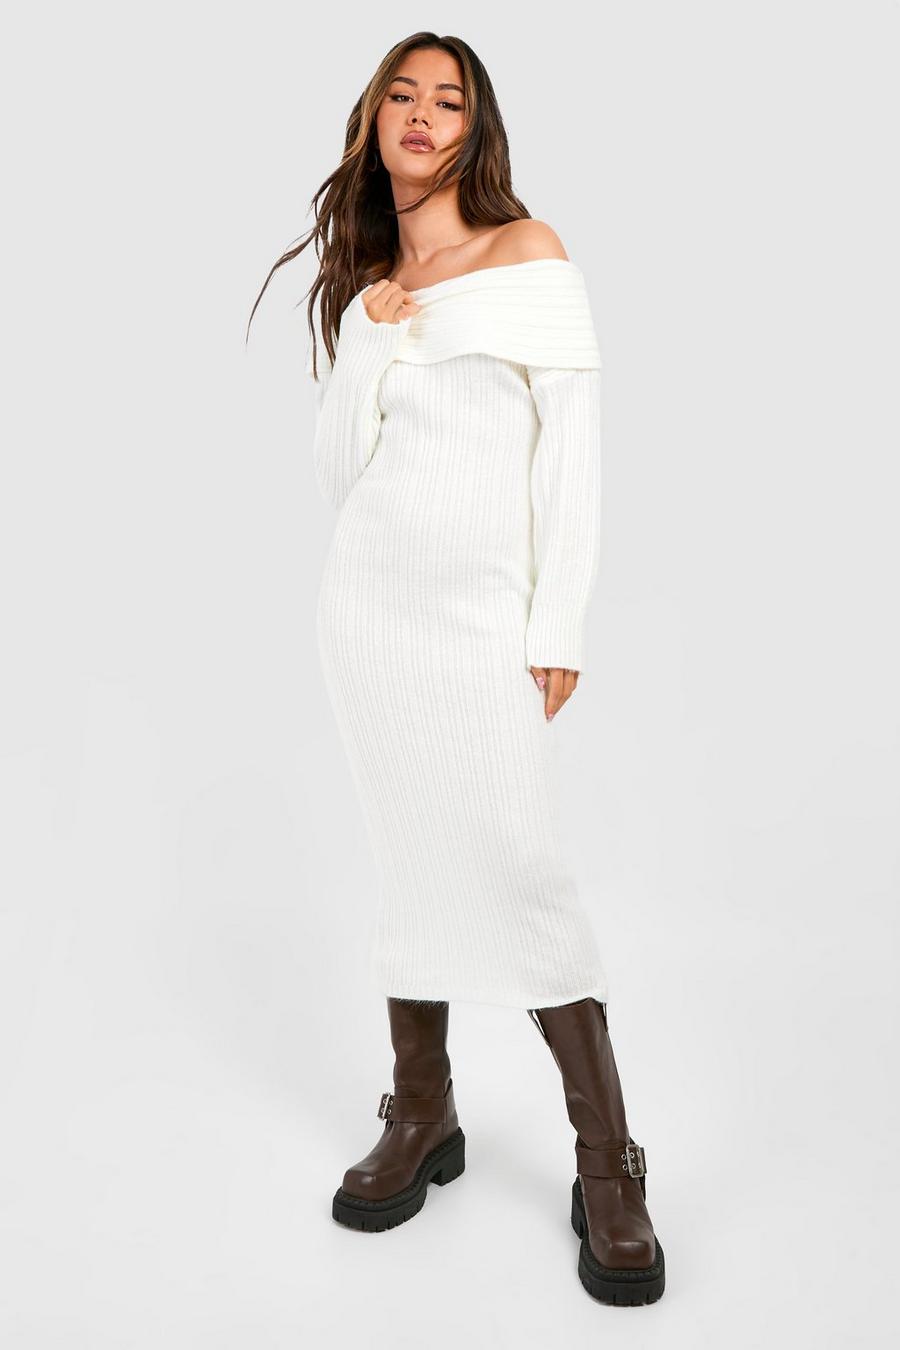 Sweater Dresses, Knitted Dresses